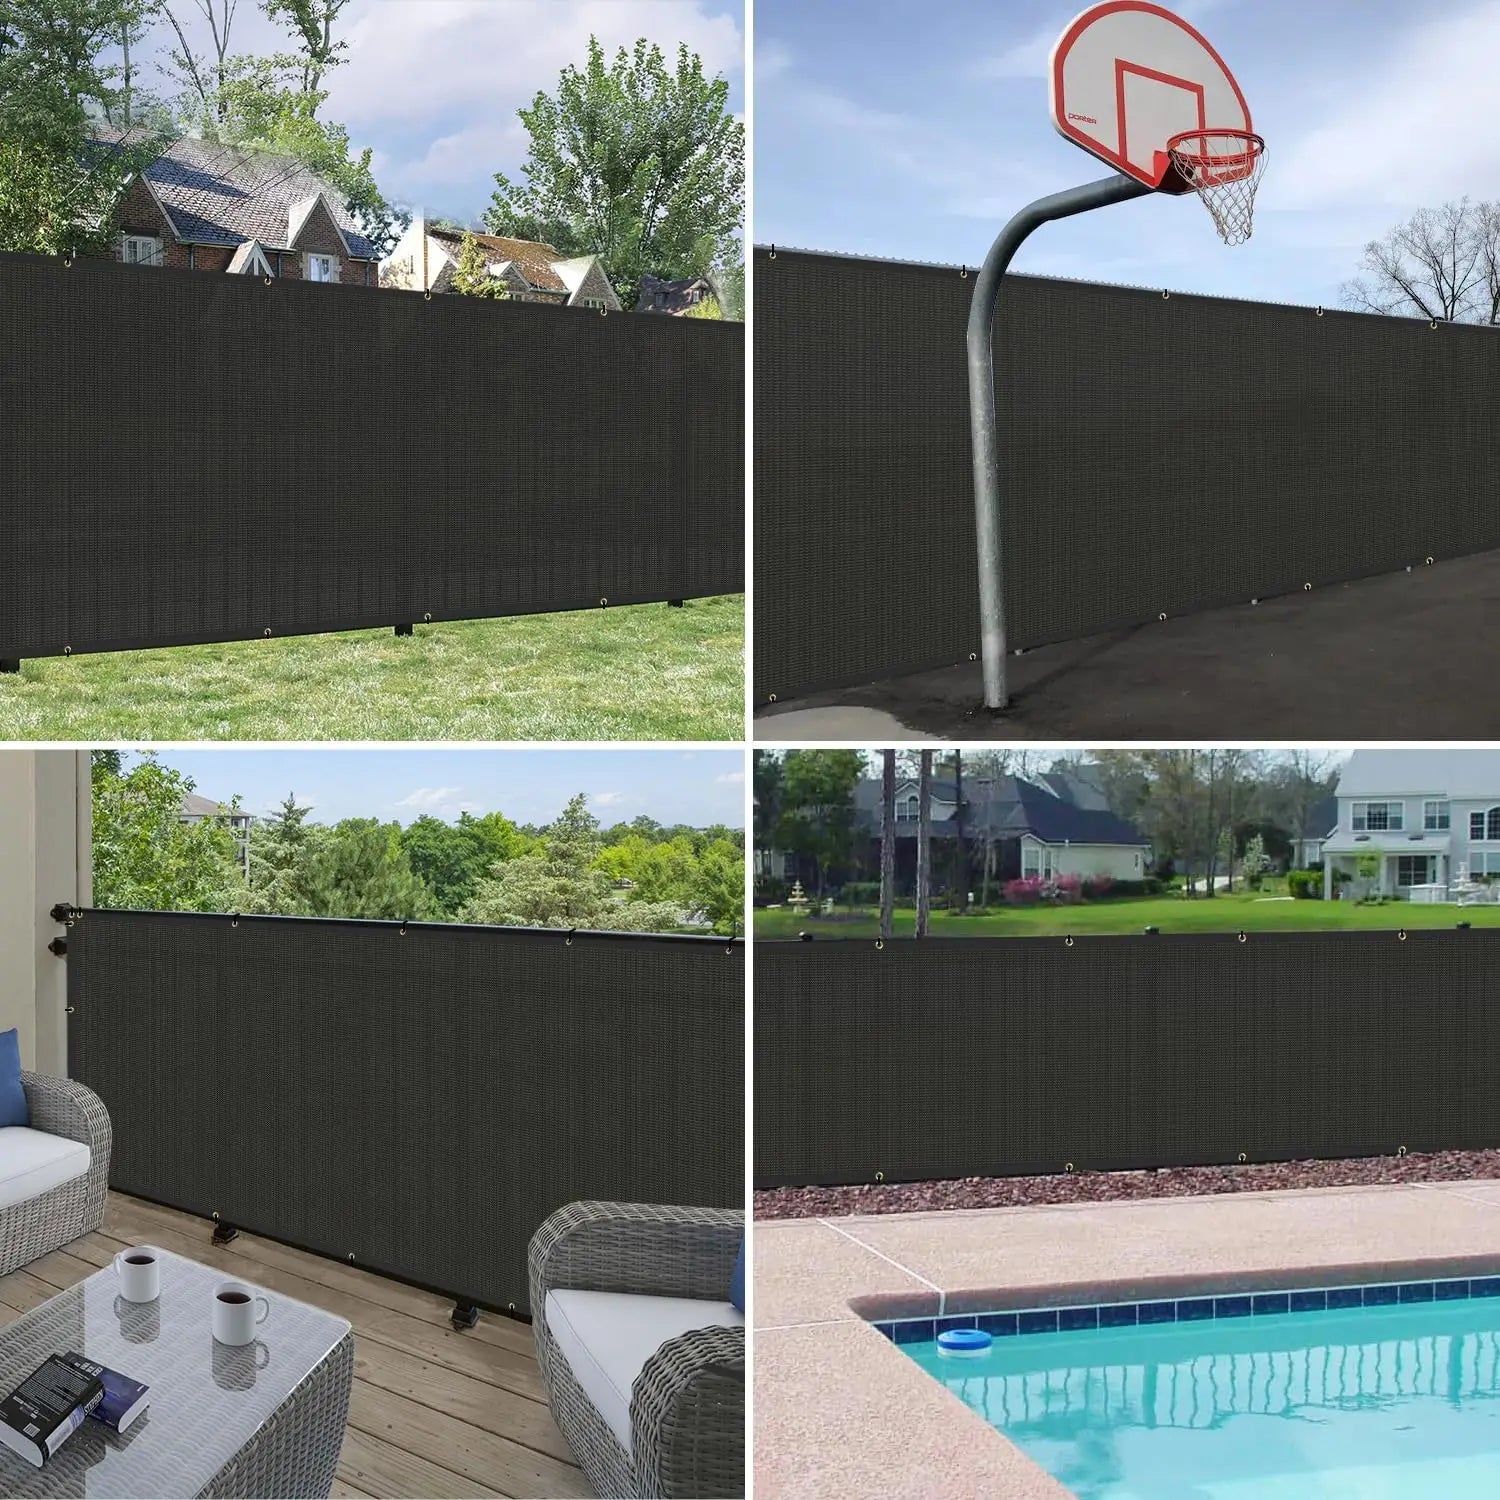 6' X 22' Privacy Fence Screen in Black W/ Brass Grommet 85% Blockage Windscreen Outdoor Mesh Fencing Cover Netting 150GSM Fabric